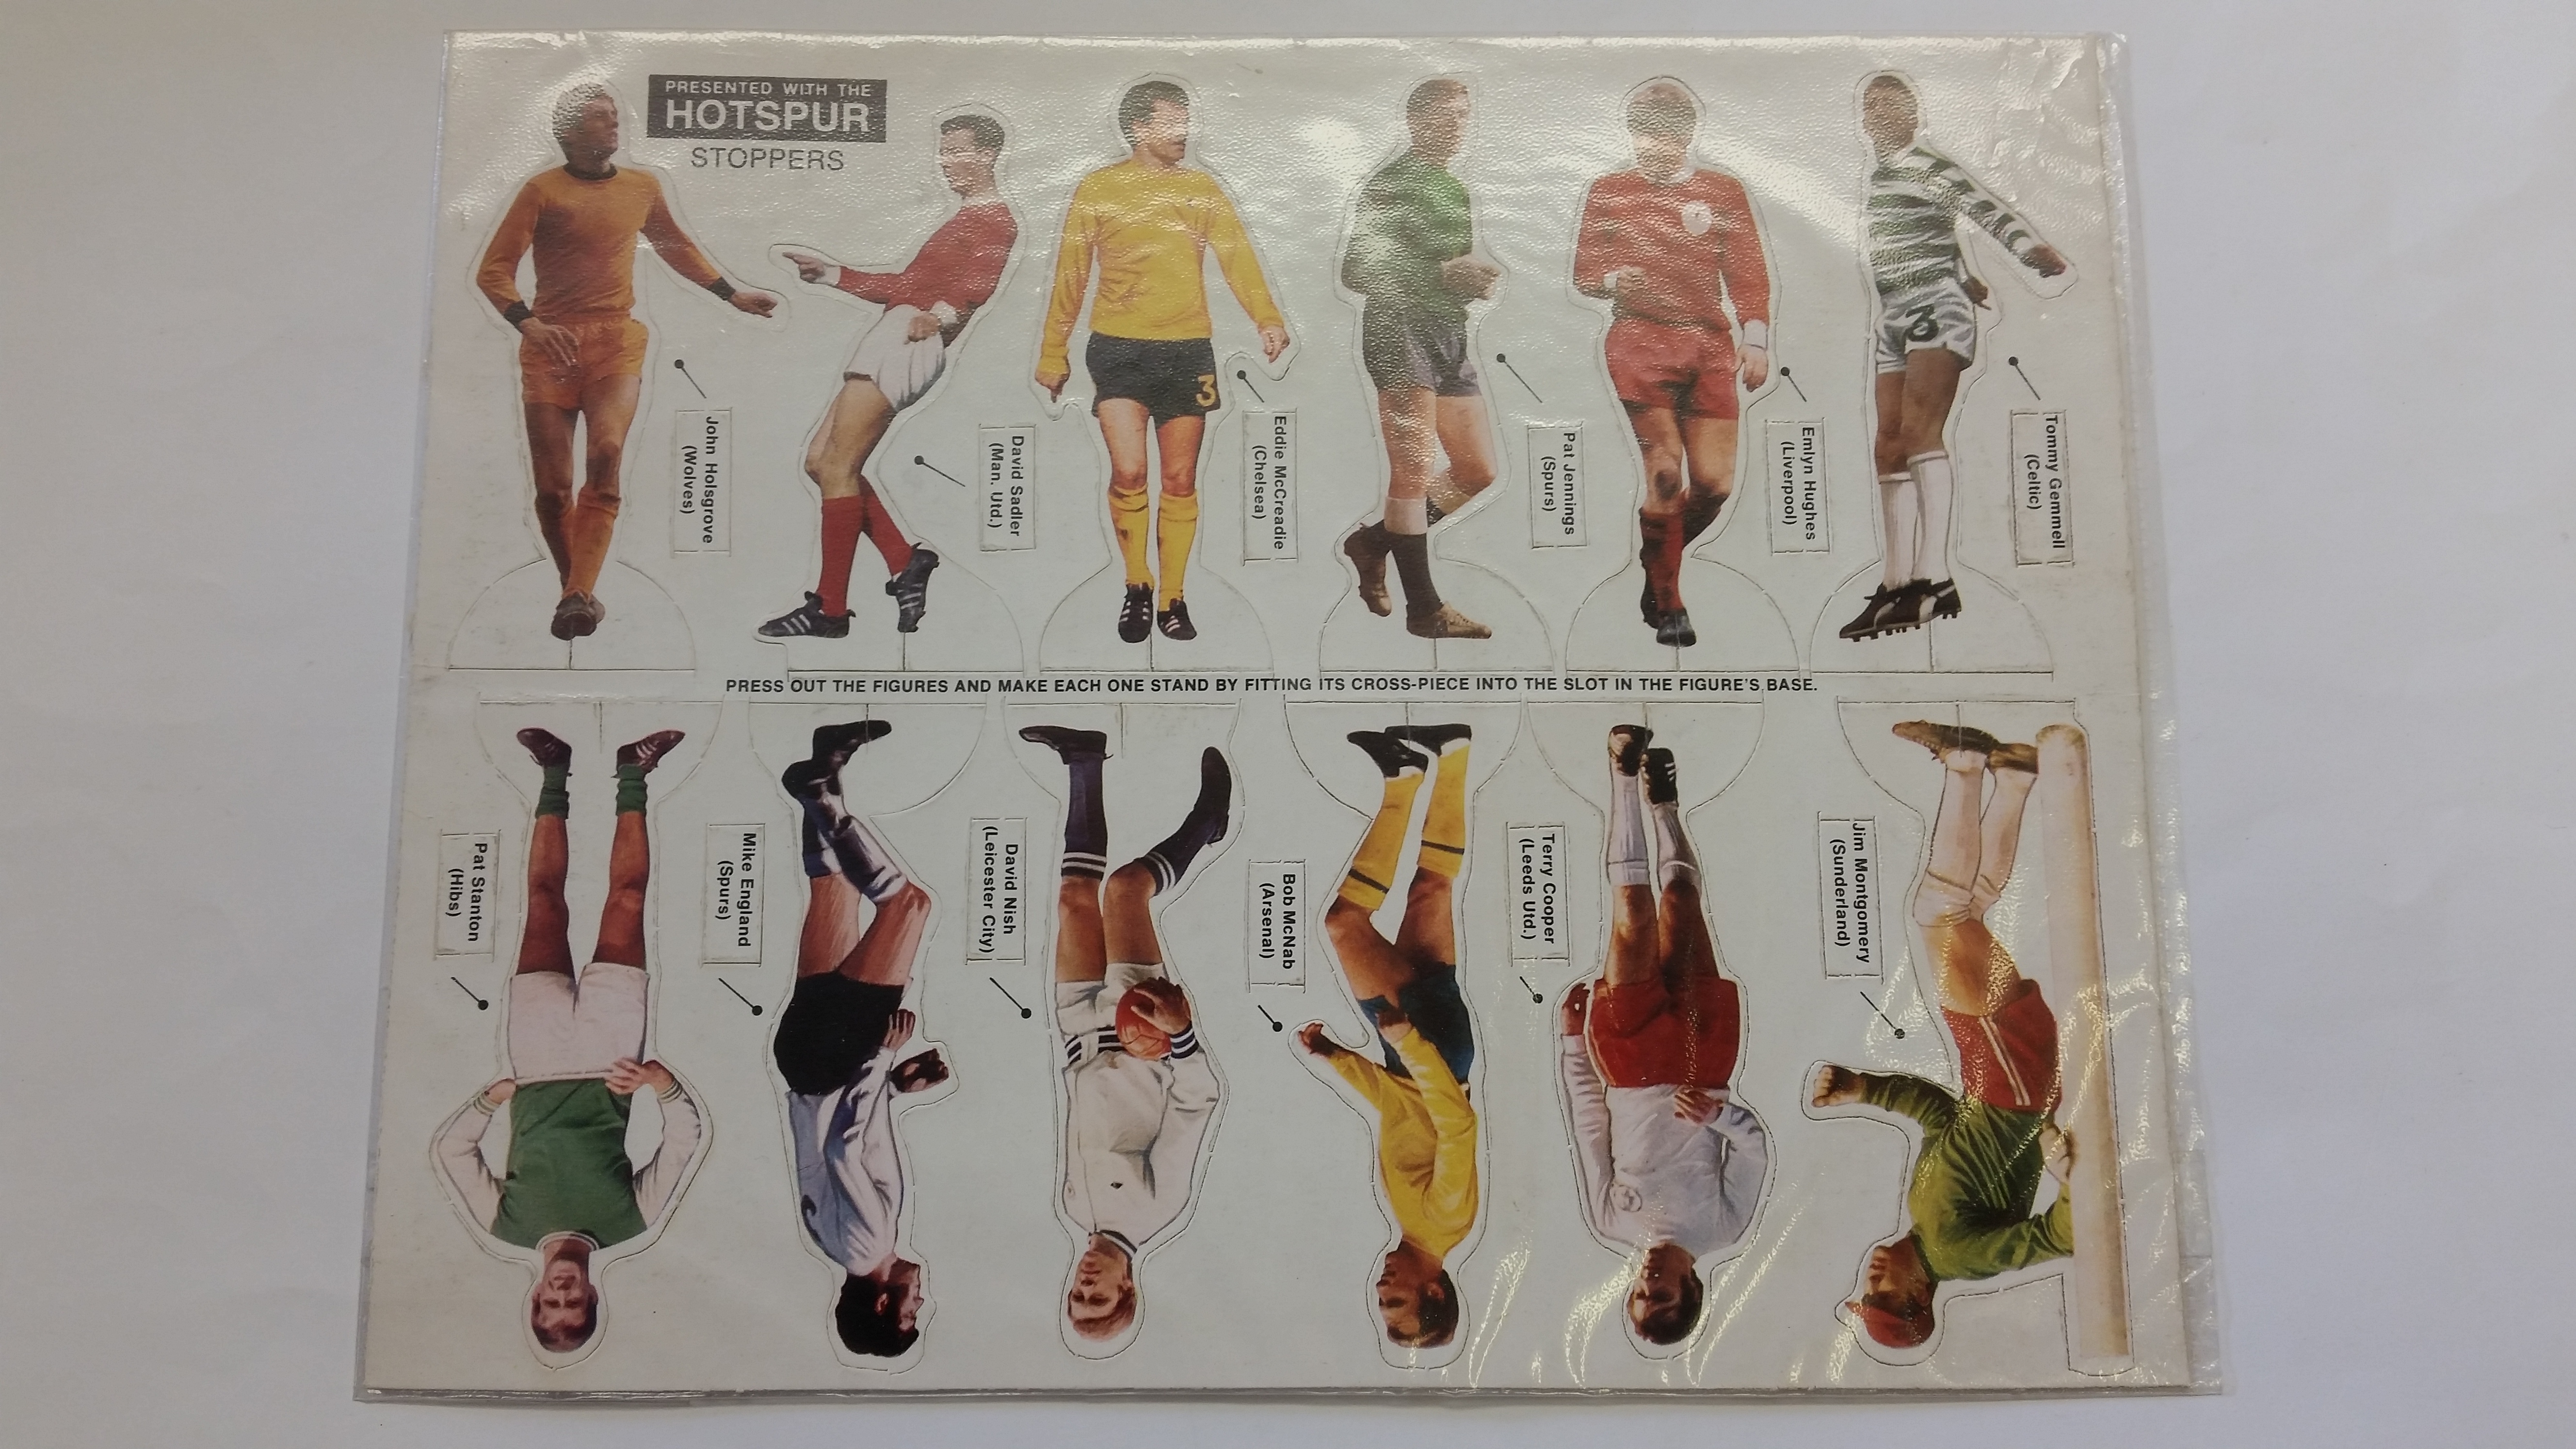 THOMSON, uncut sheet of Footballers (self-standing), Stoppers, issued with Hotspur, VG